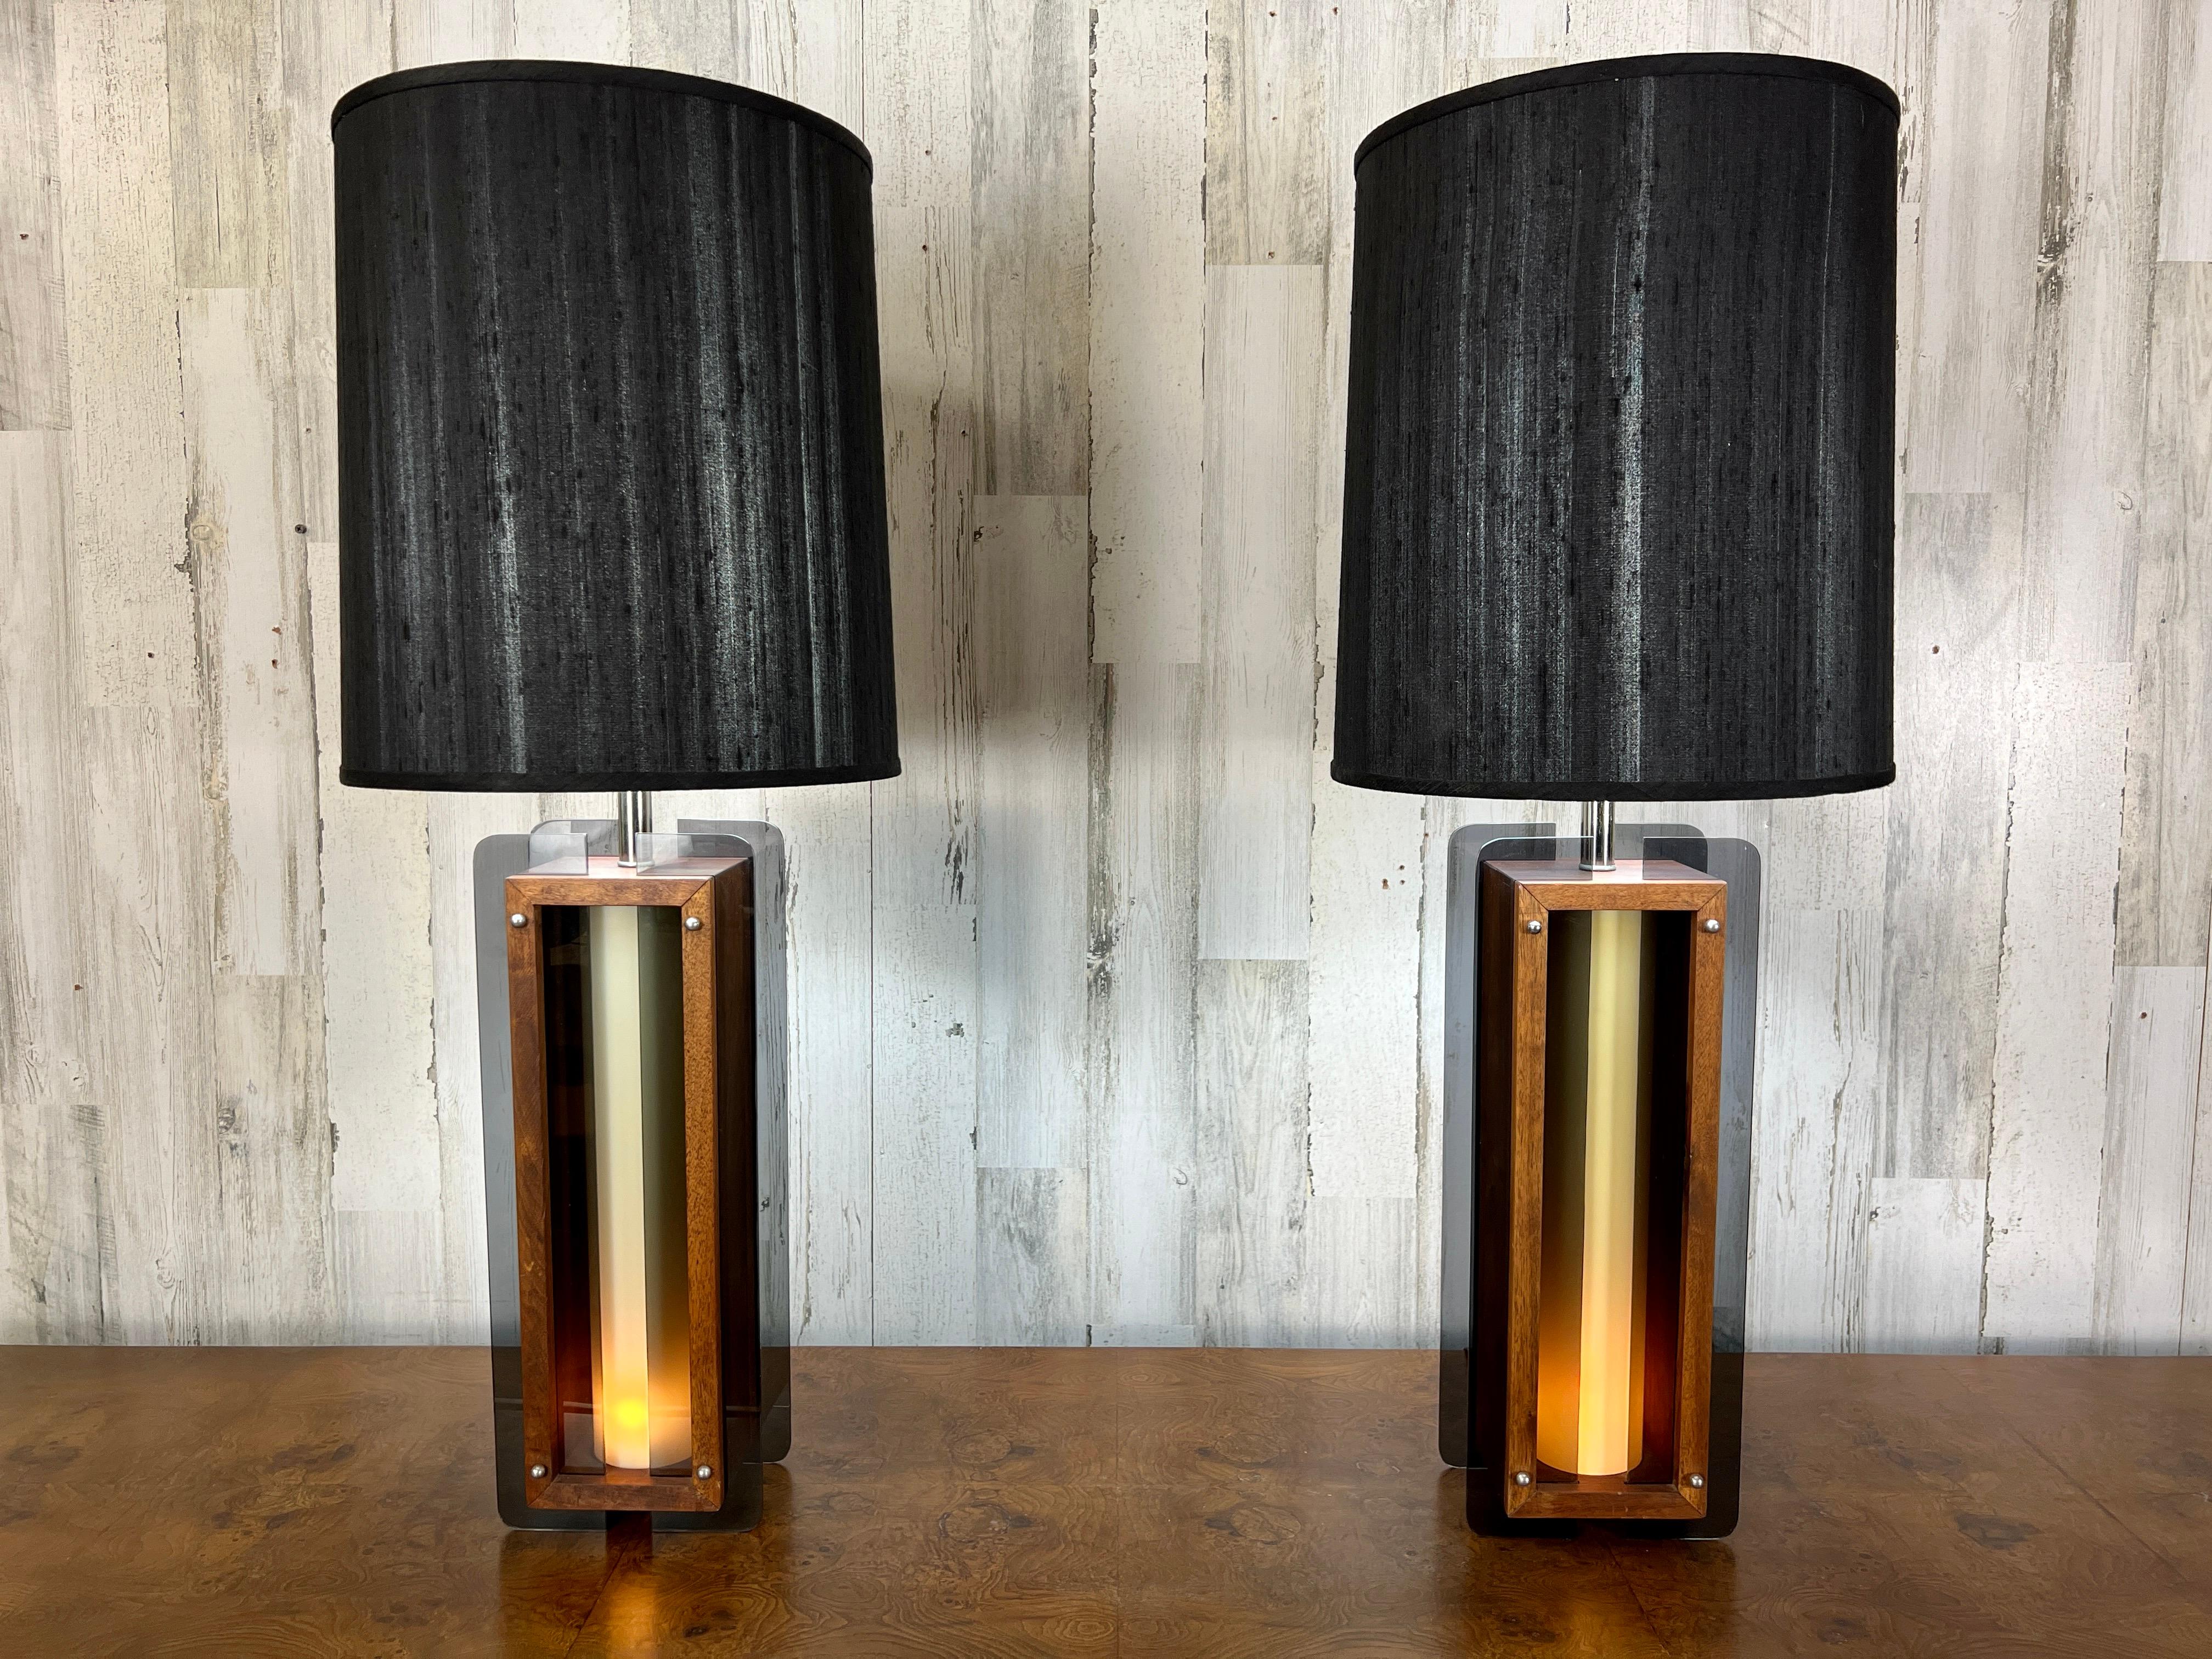 Pair of midcentury table lamps with night light in the base for mood lighting.